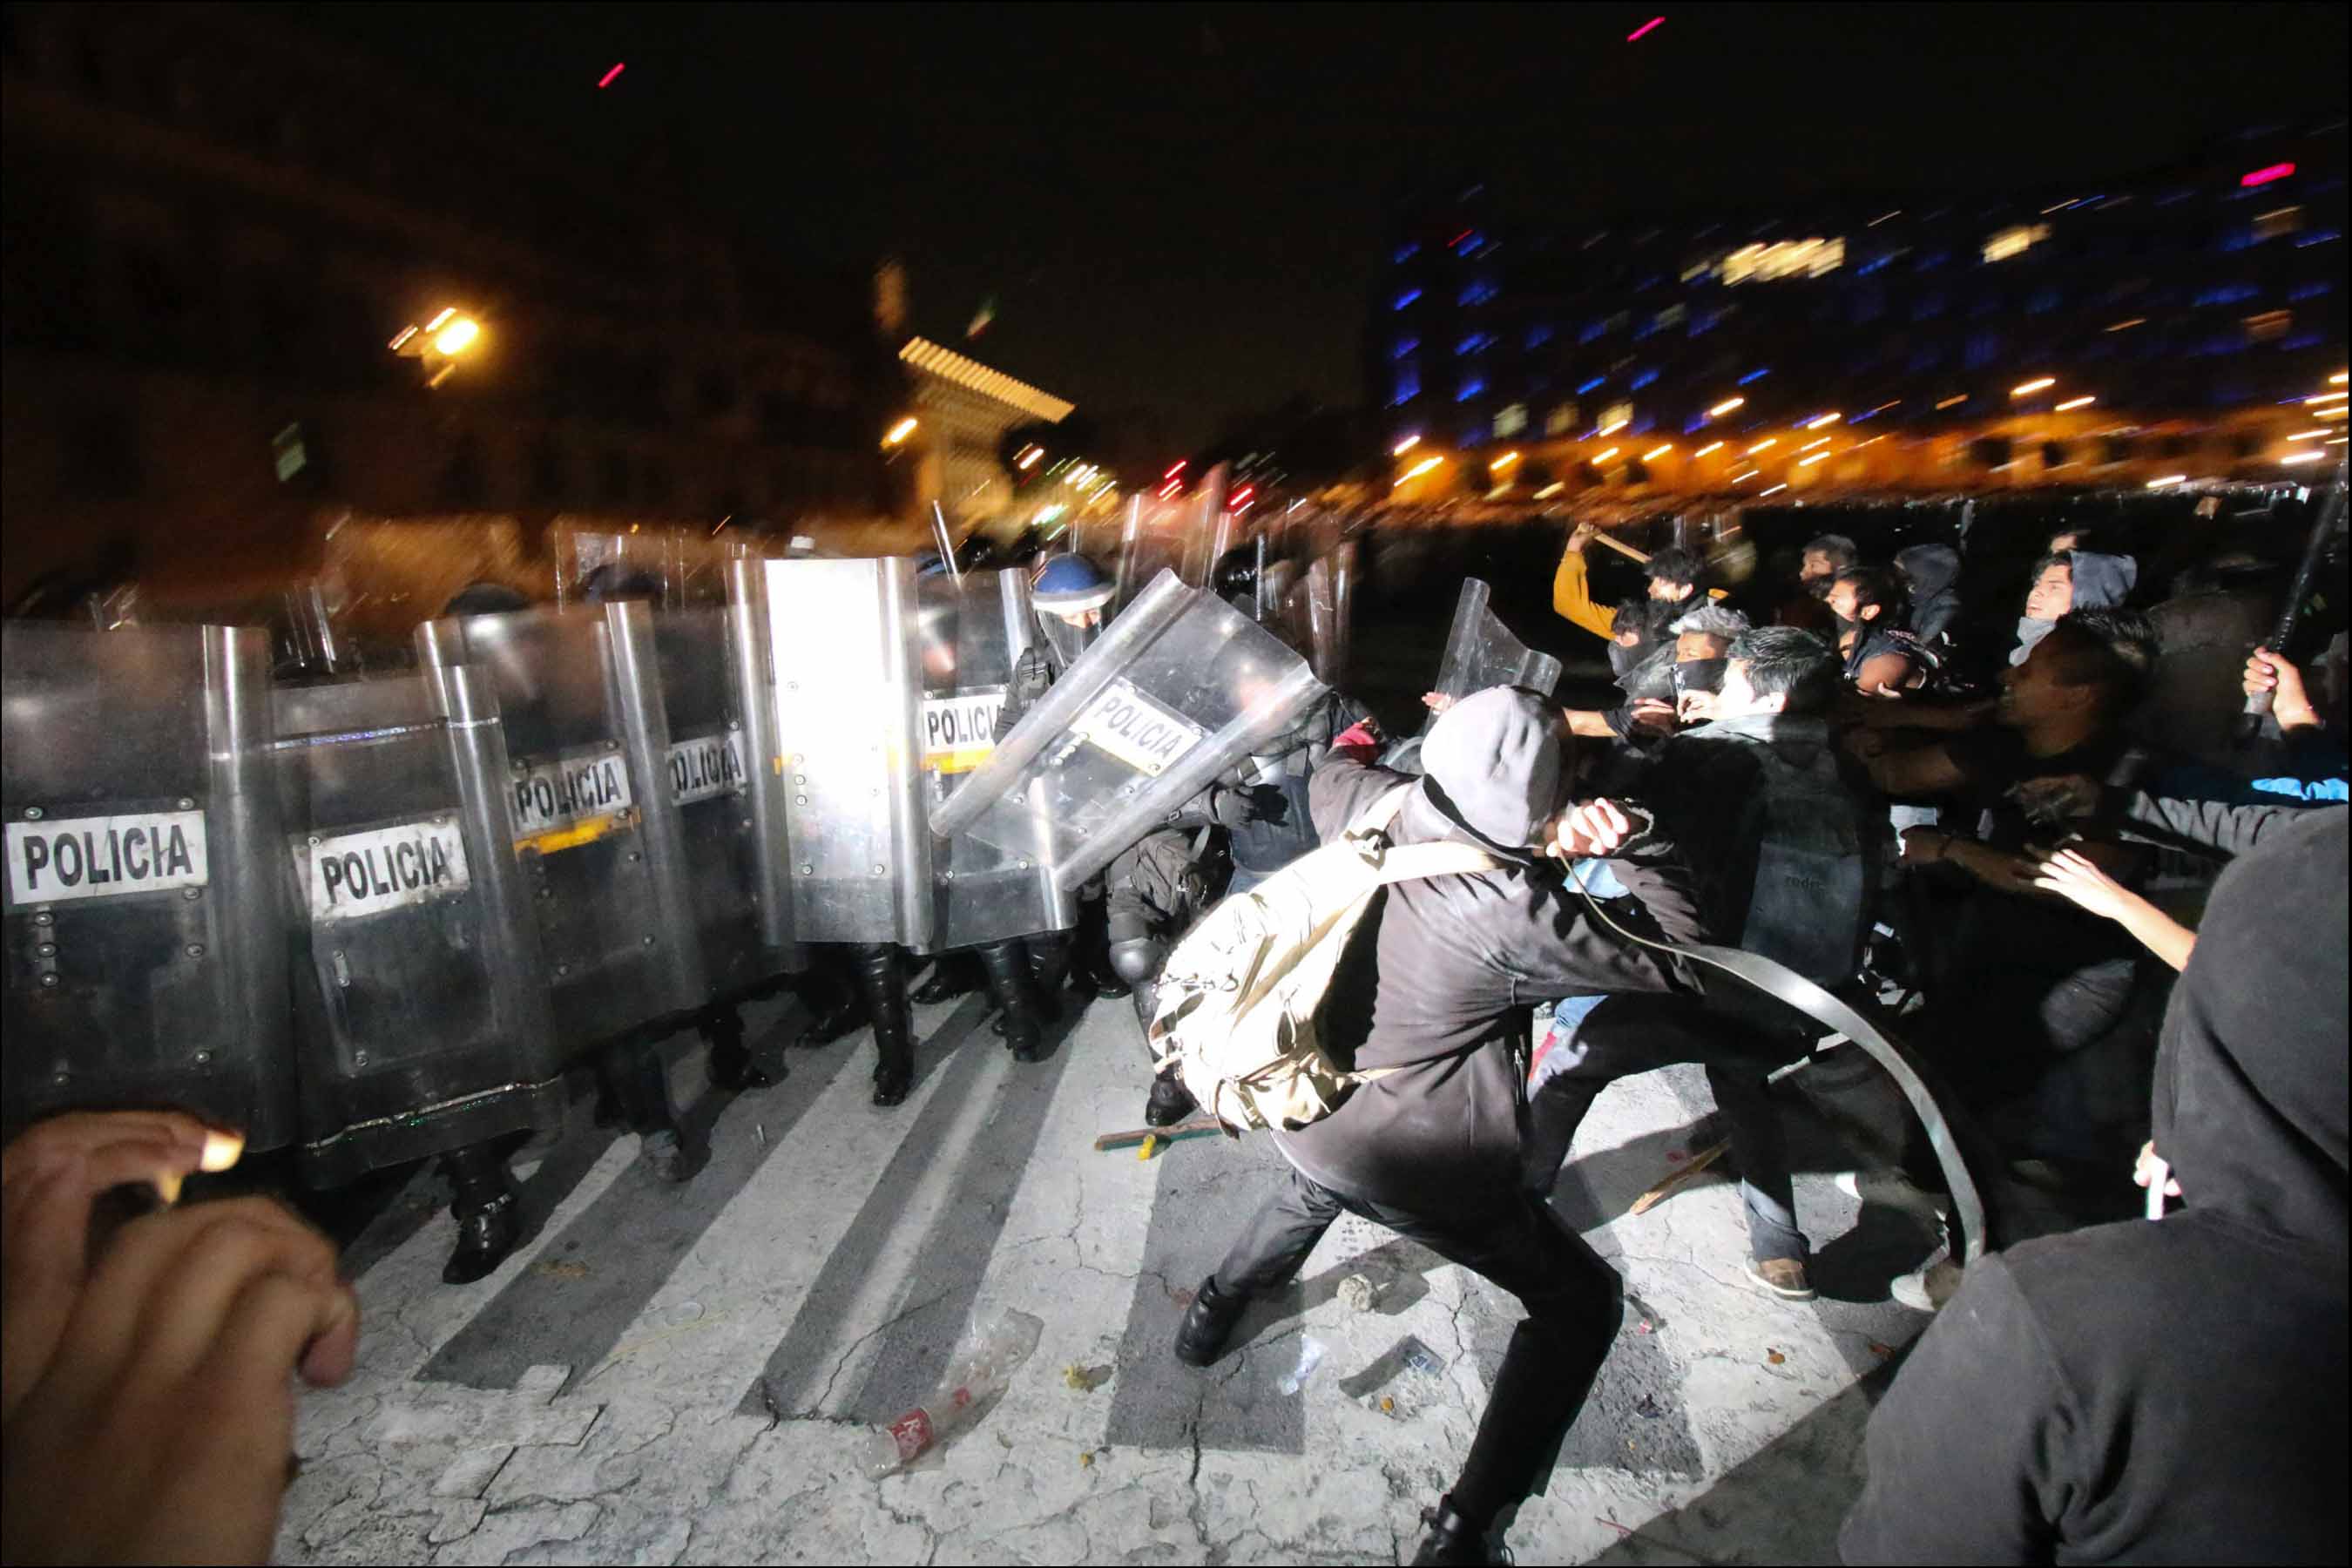 Mexican police and protesters clash at a rally in Mexico City, D.F, Mexico, Thursday, Nov. 20, 2014. The rally followed similar, partly violent demonstrations in the country since the disappearance of 43 students in Guerrero State and was primarily against president Enrique Peña Nieto, asking him to step down.